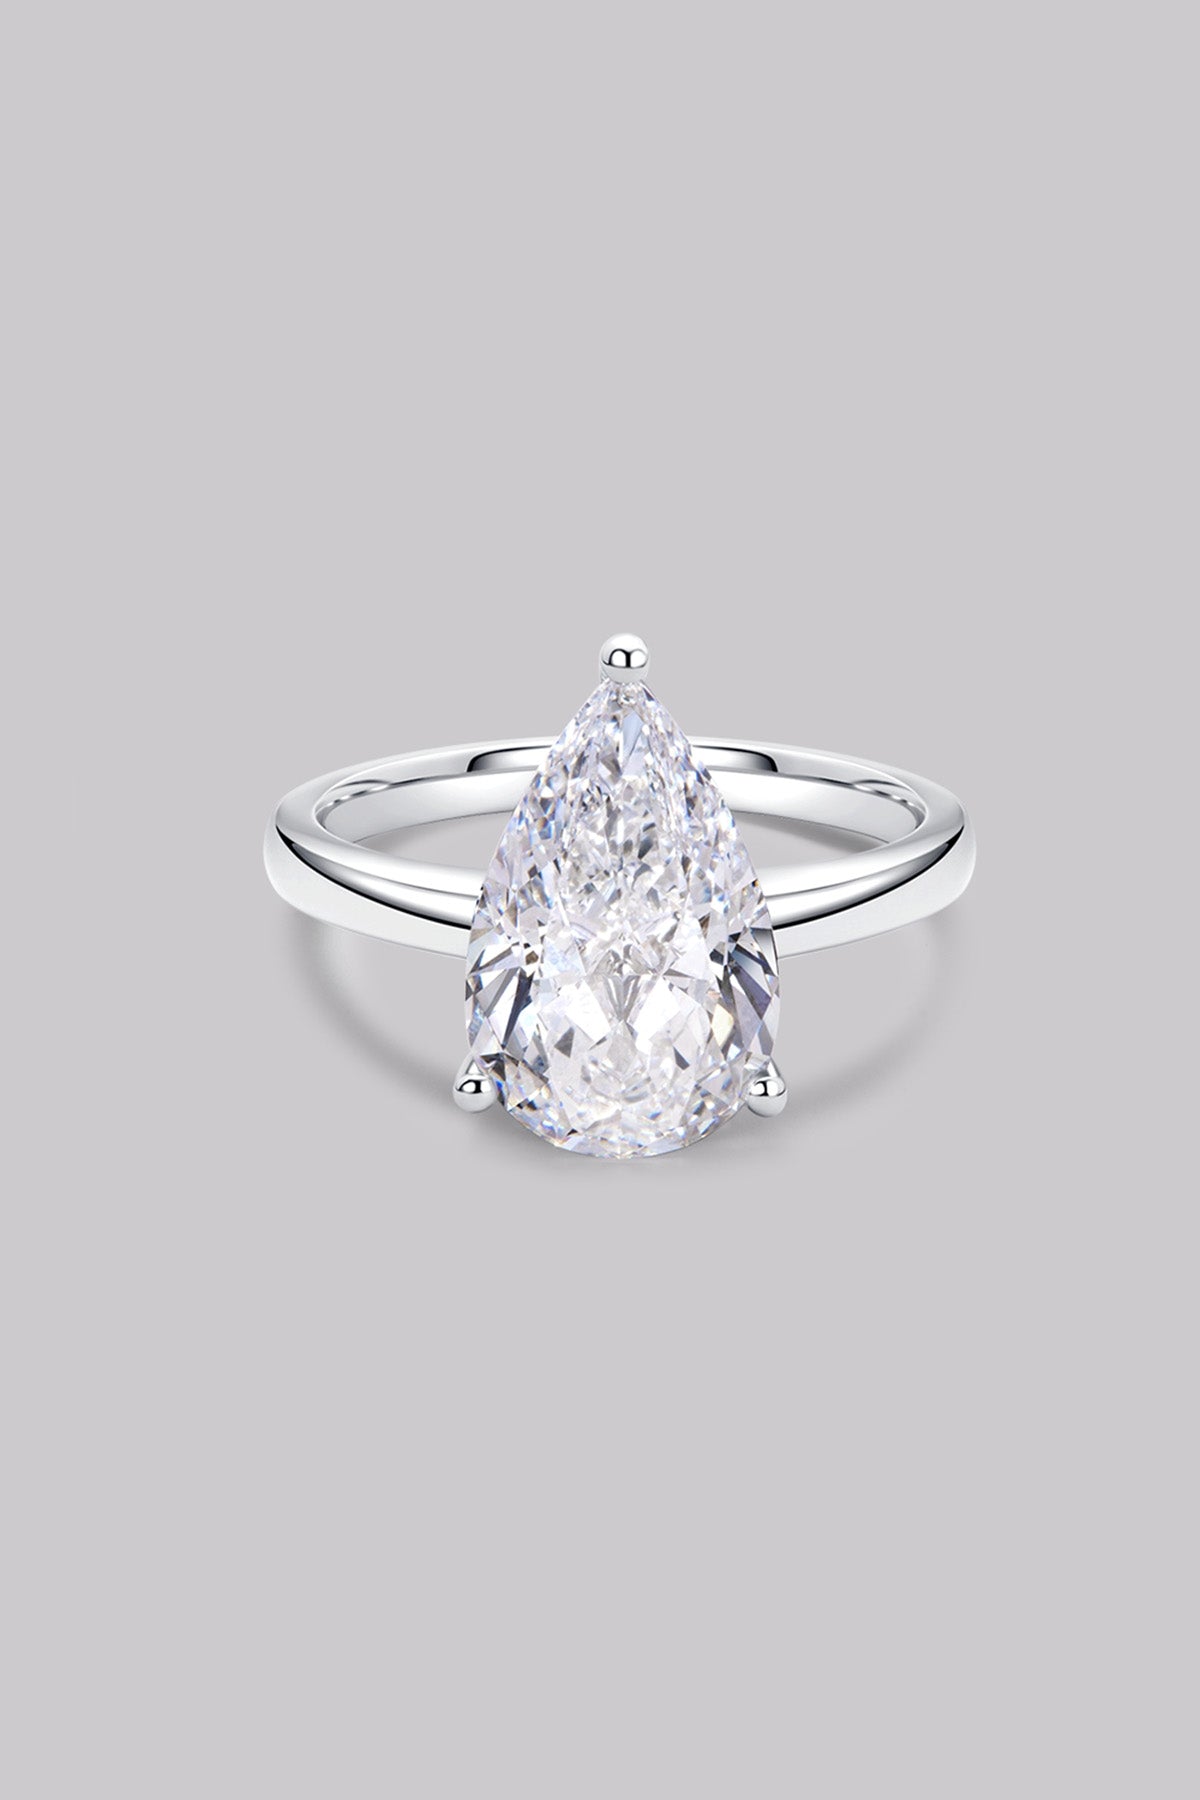 Solitaire Pear Diamond Ring (3ct)